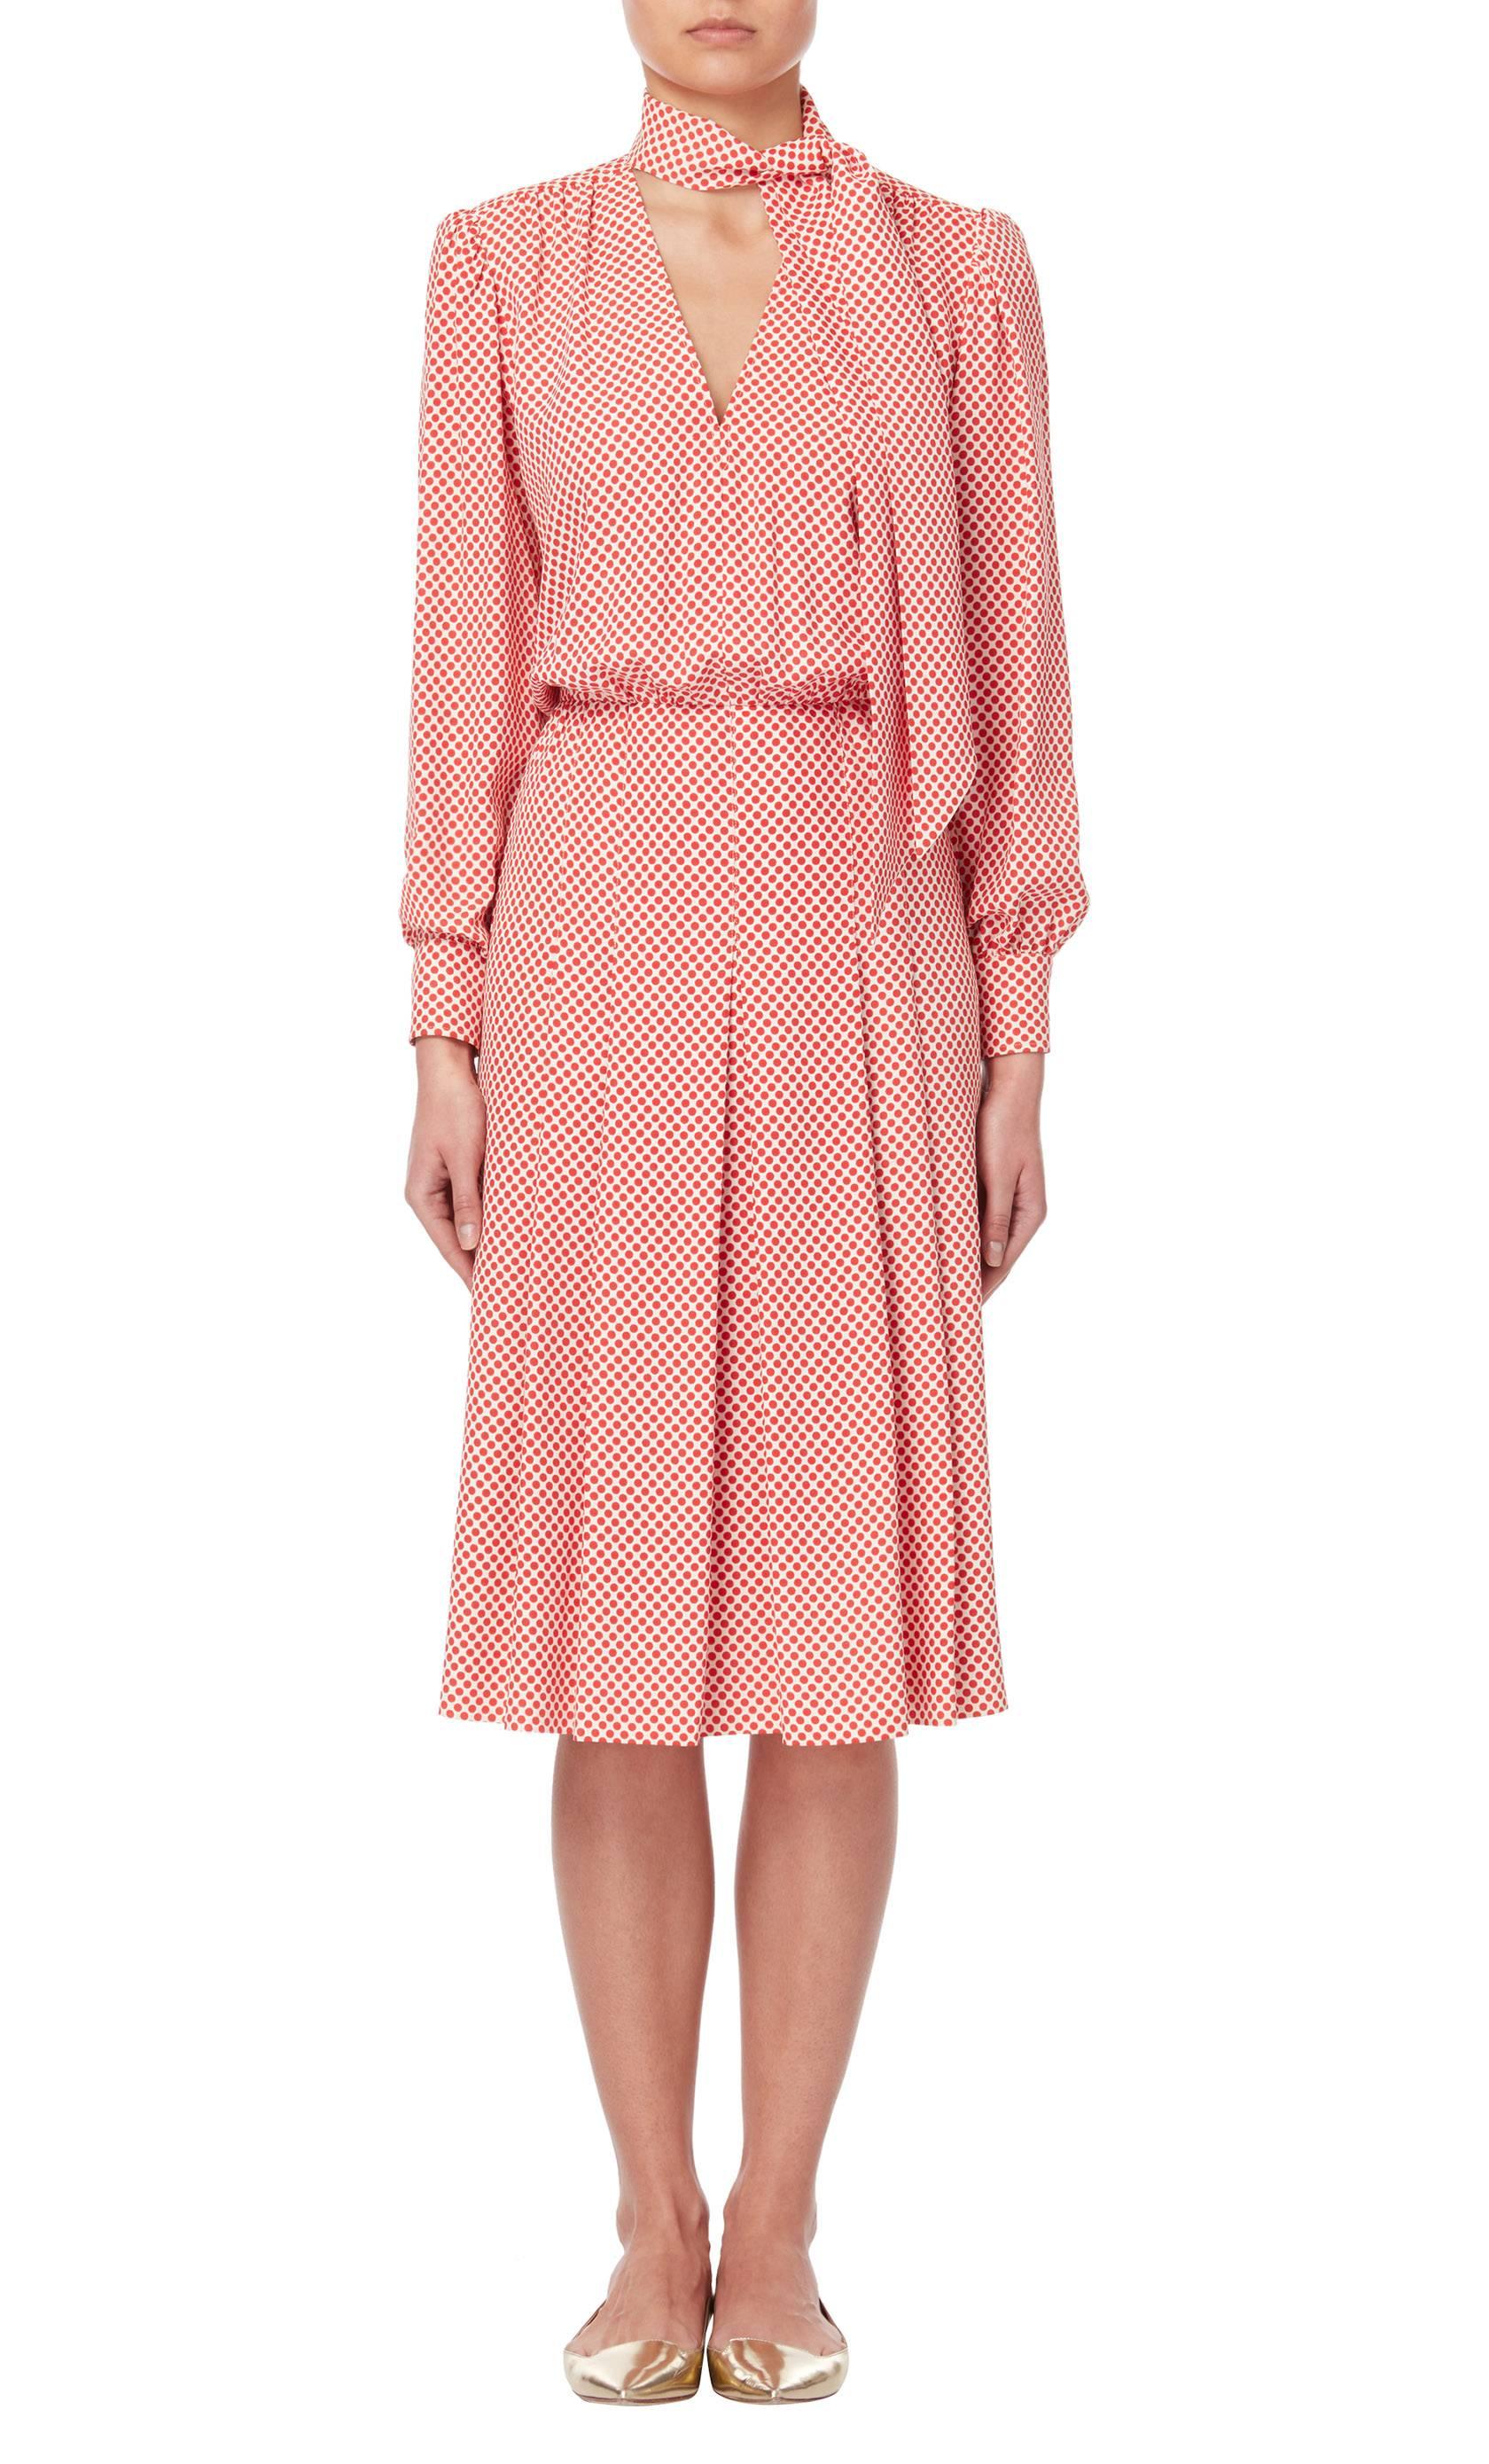 Constructed in ivory and red polka dot print silk, this Yves Saint Laurent dress features a v-neckline and tie detail on the neck. The long sleeves fasten at the cuff with buttons, while the skirt is box pleated to the front.